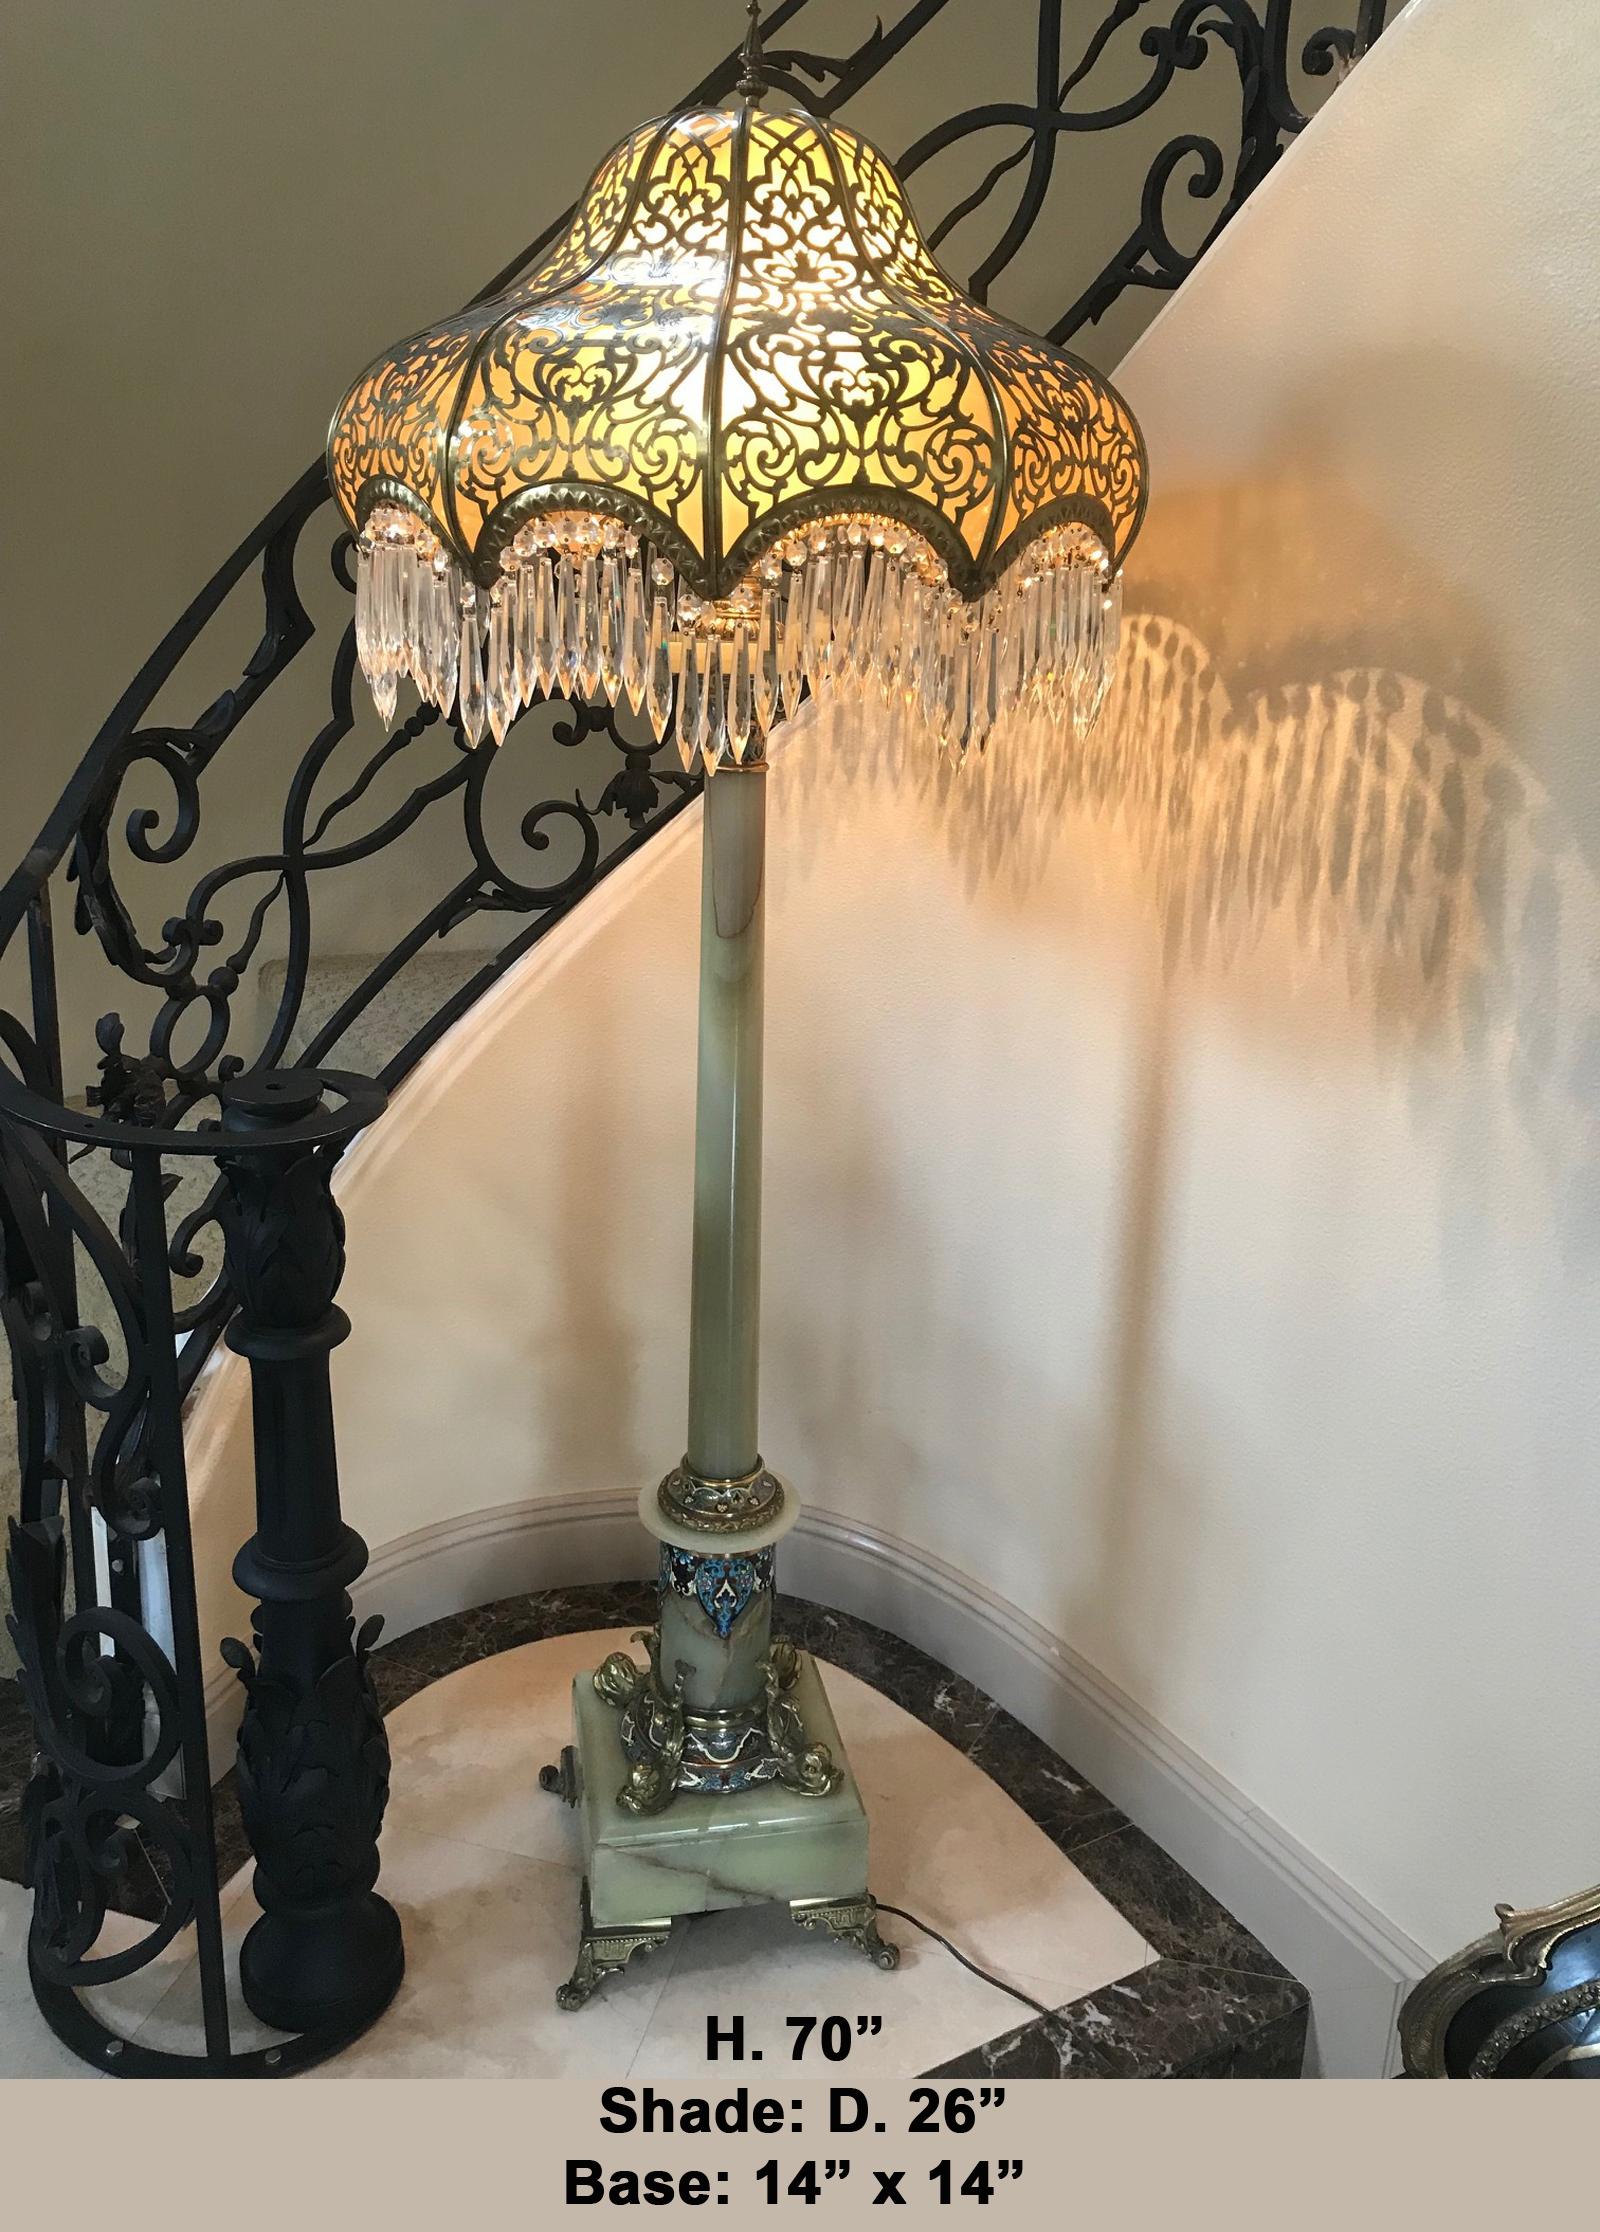 Spectacular 19th century French Champleve and onyx floor lamp. 
The exquisite two layer brass shade of Mediterranean influence is finely reticulated and engraved with patterned fretwork of scrollwork and foliage, trimmed with hanging cut crystal